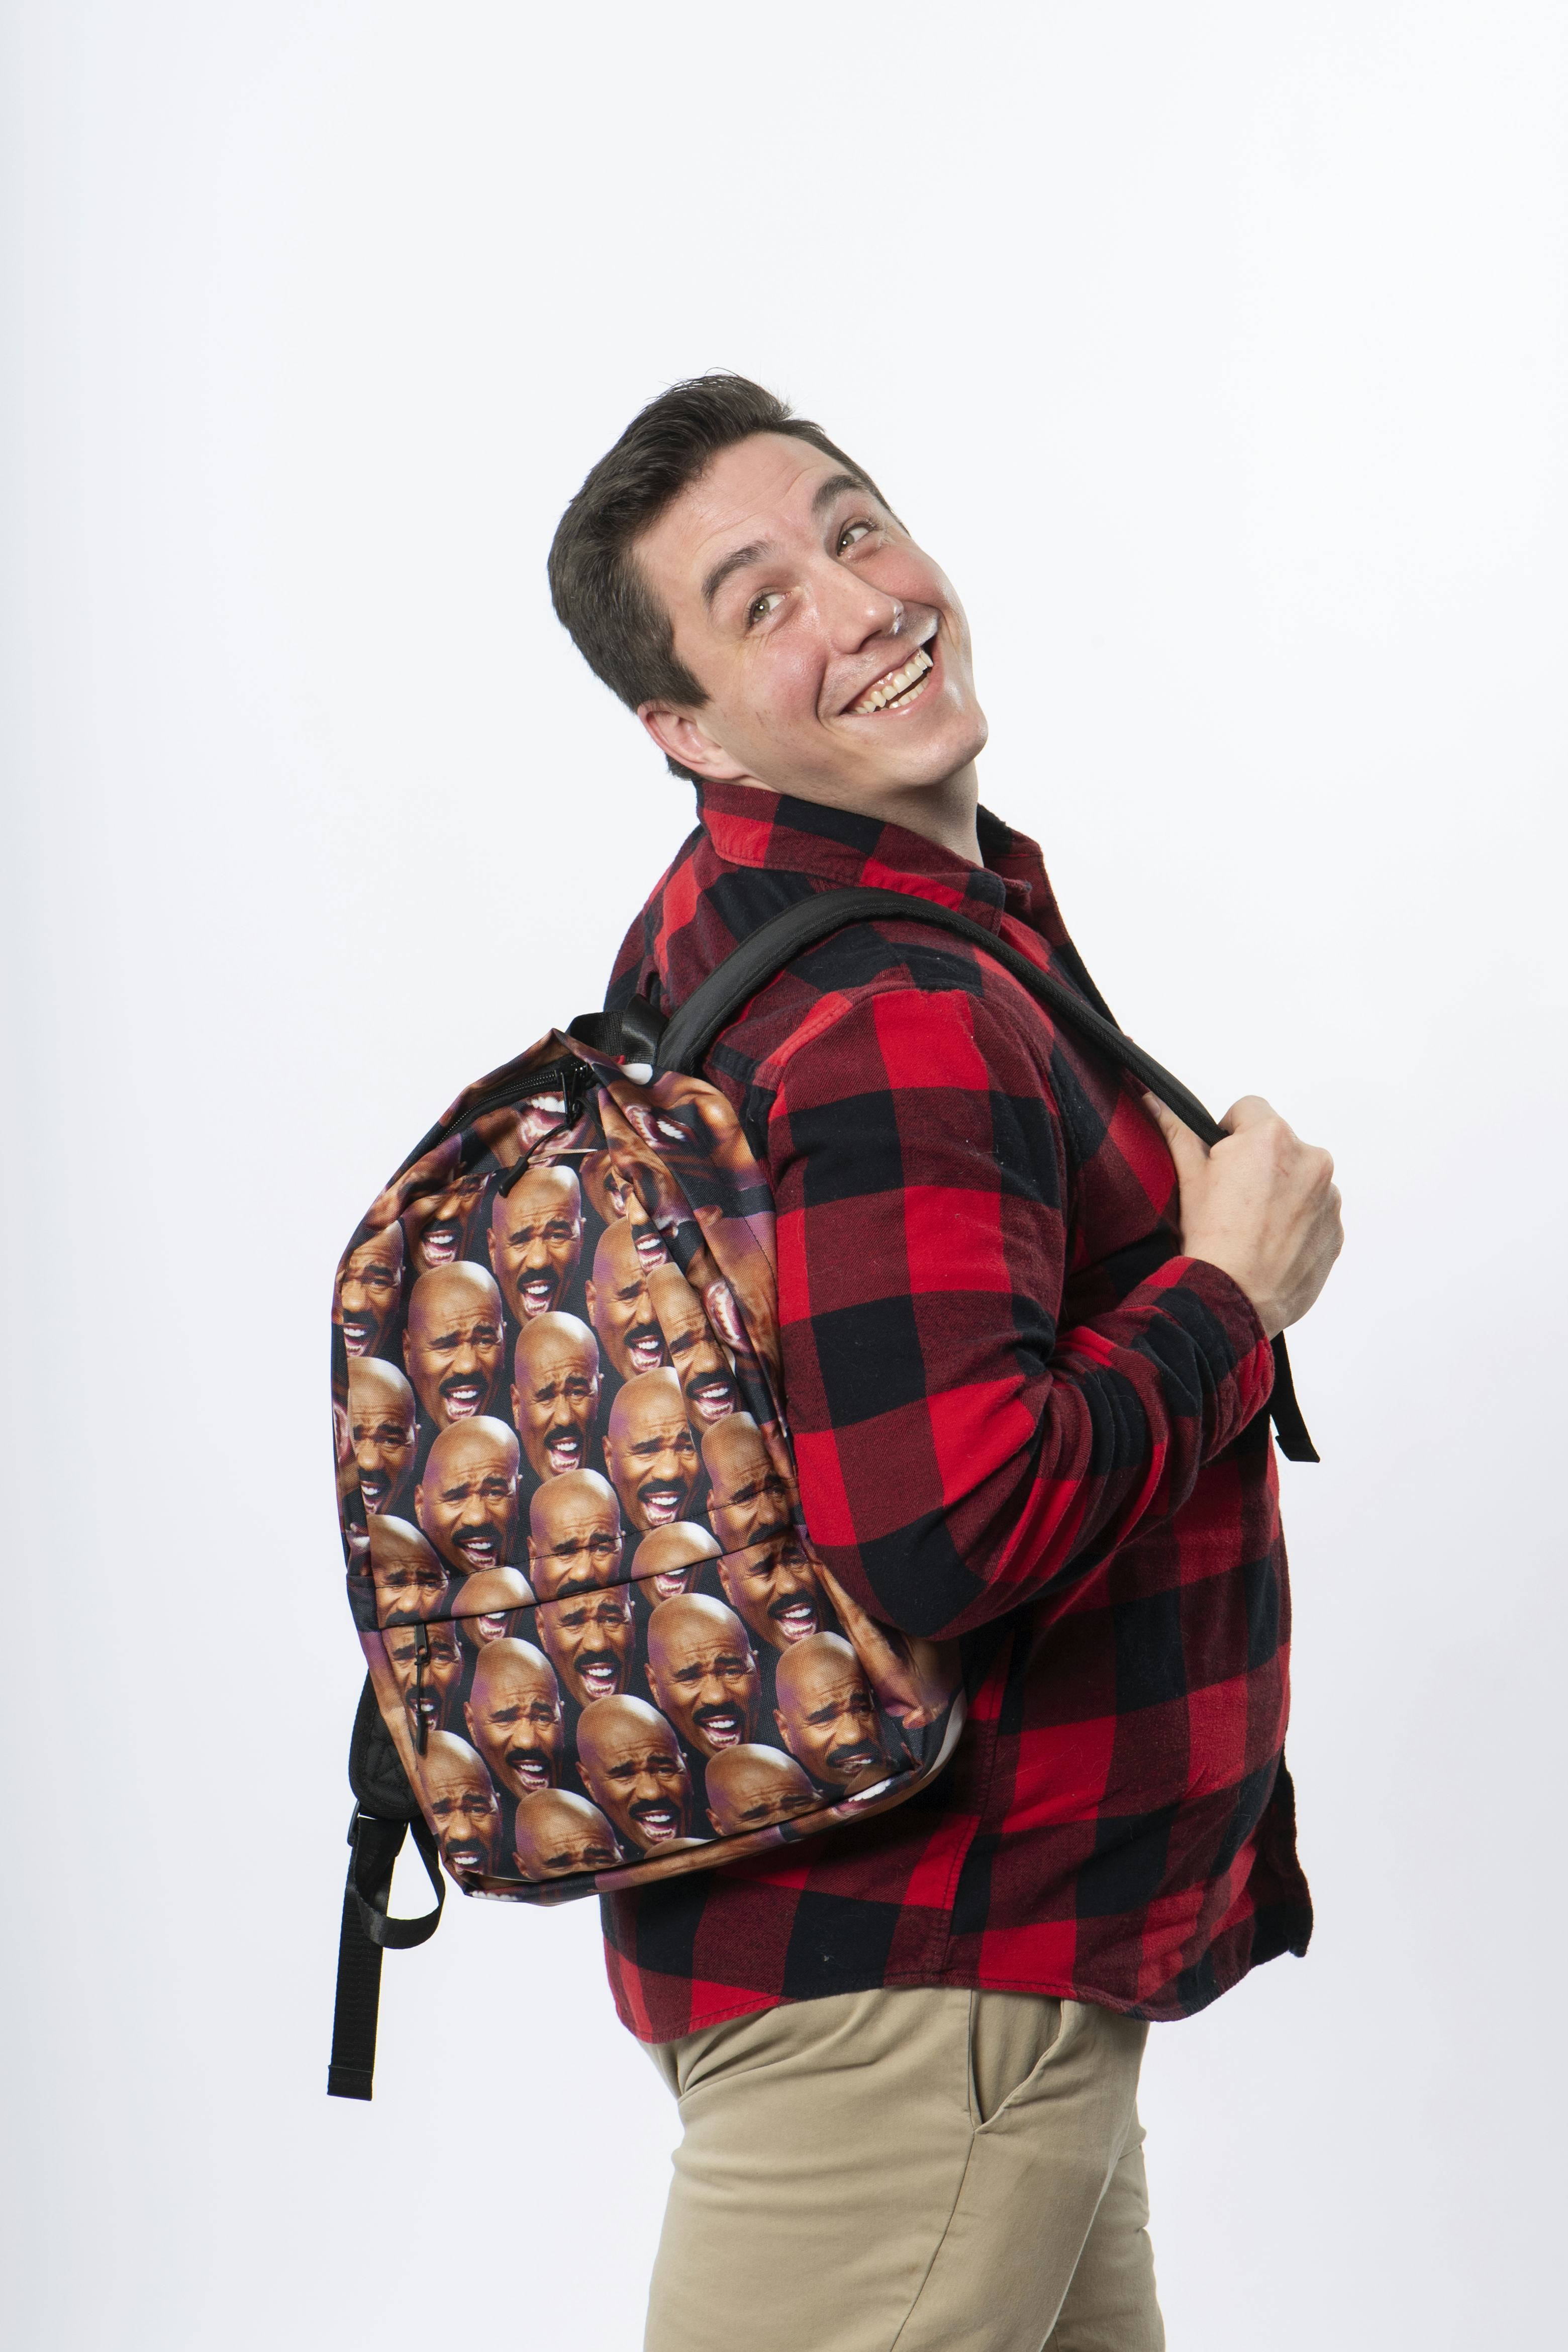 Person smiling while wearing a backpack with Steve Harvey’s laughing face printed in a pattern